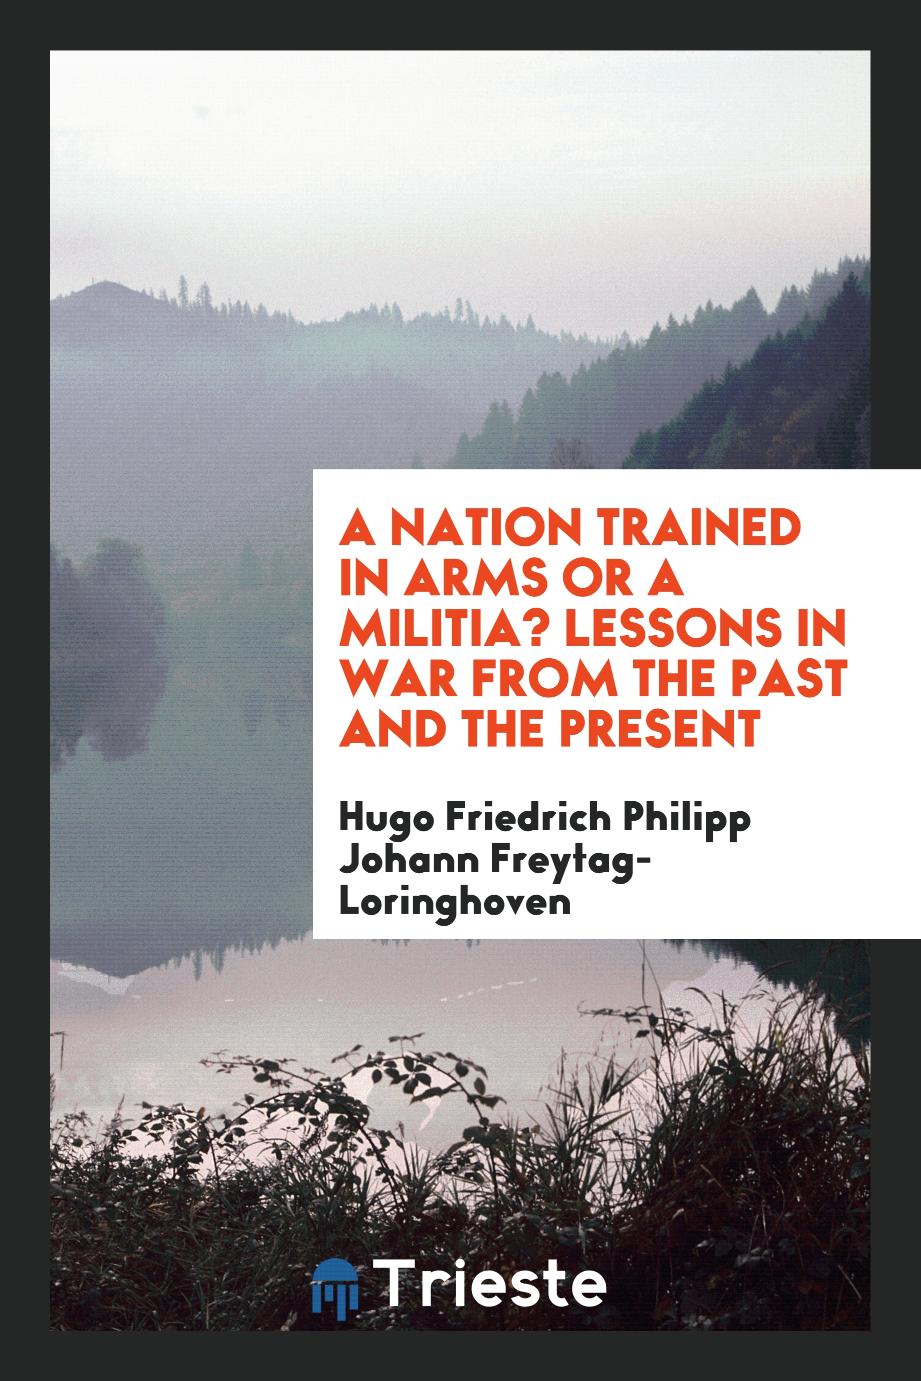 A nation trained in arms or a militia? Lessons in war from the past and the present